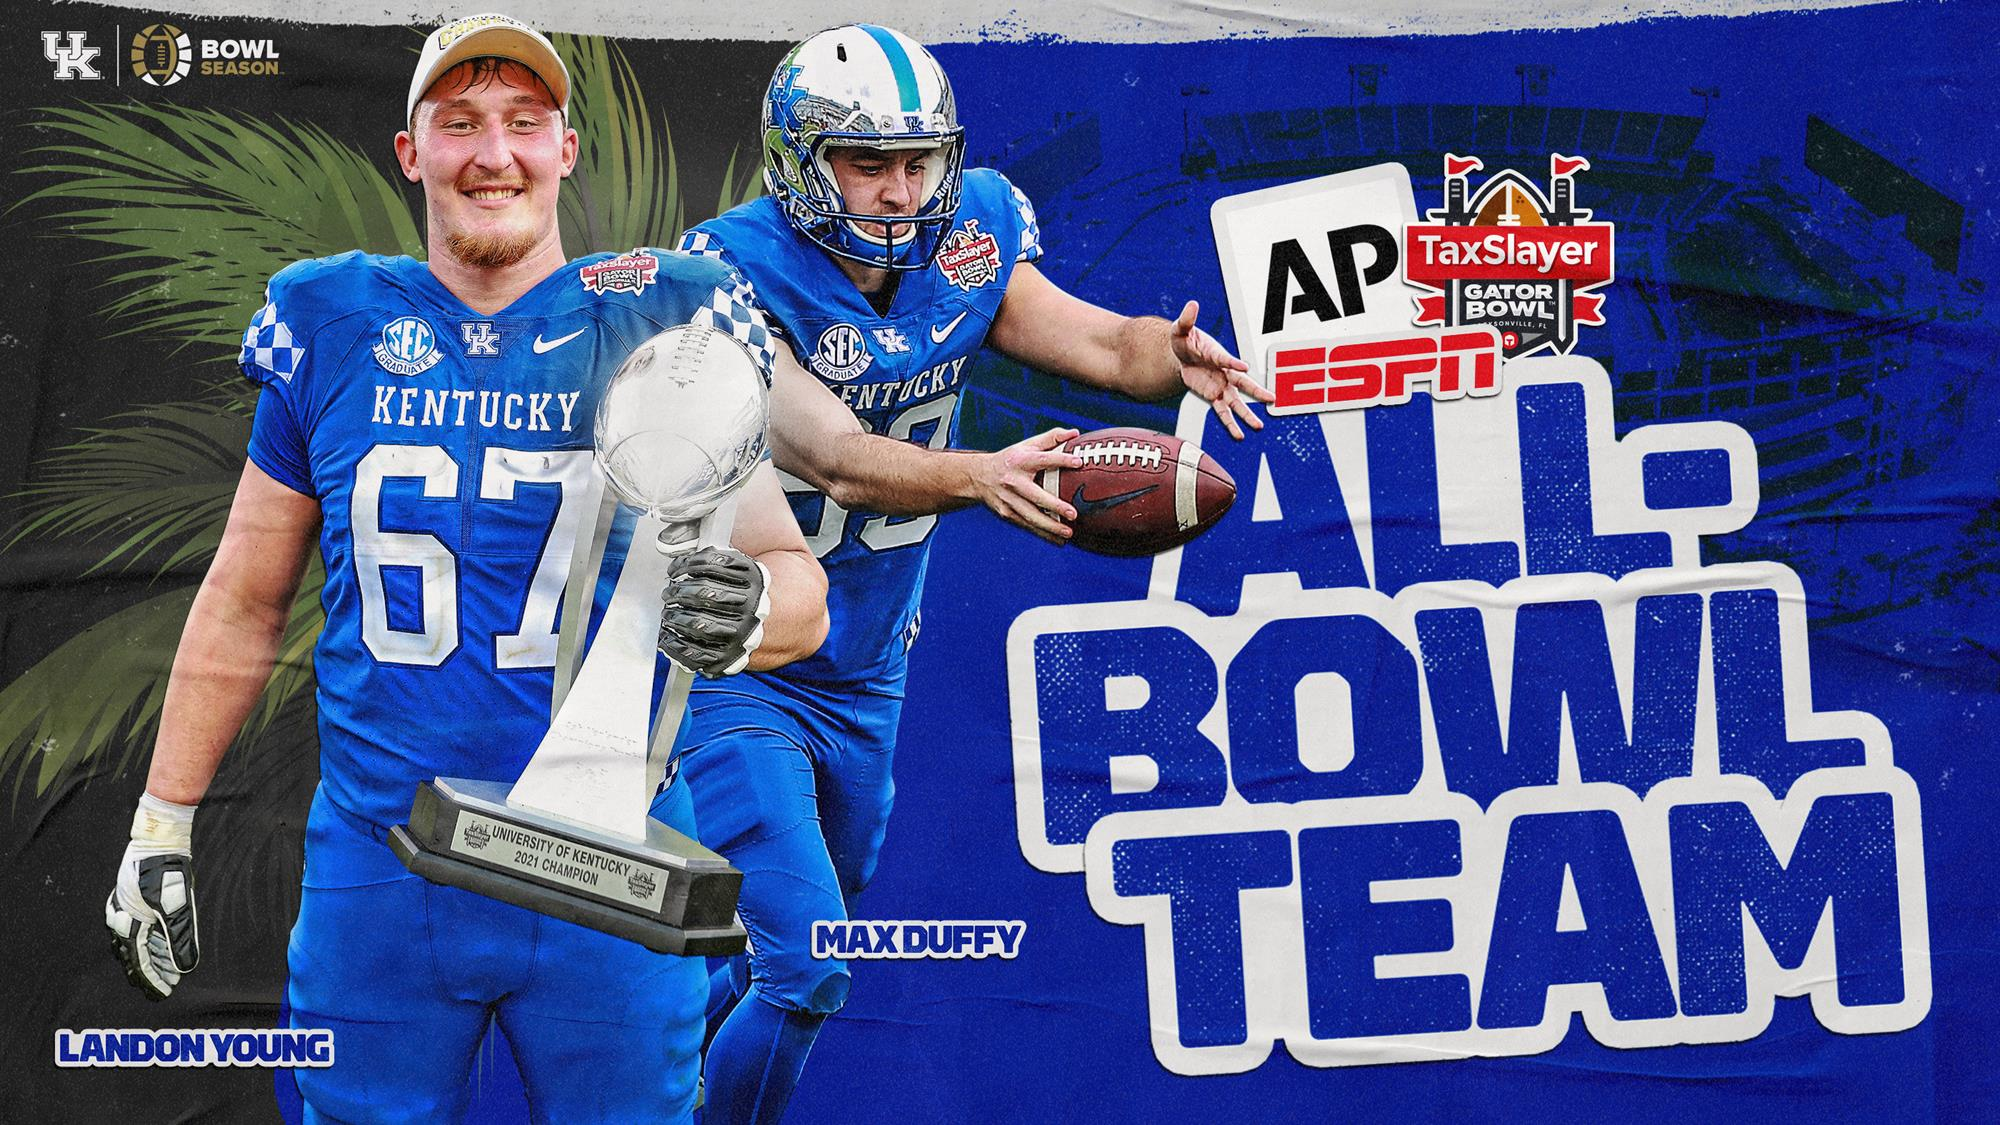 Duffy, Young Named to ESPN All-Bowl Team